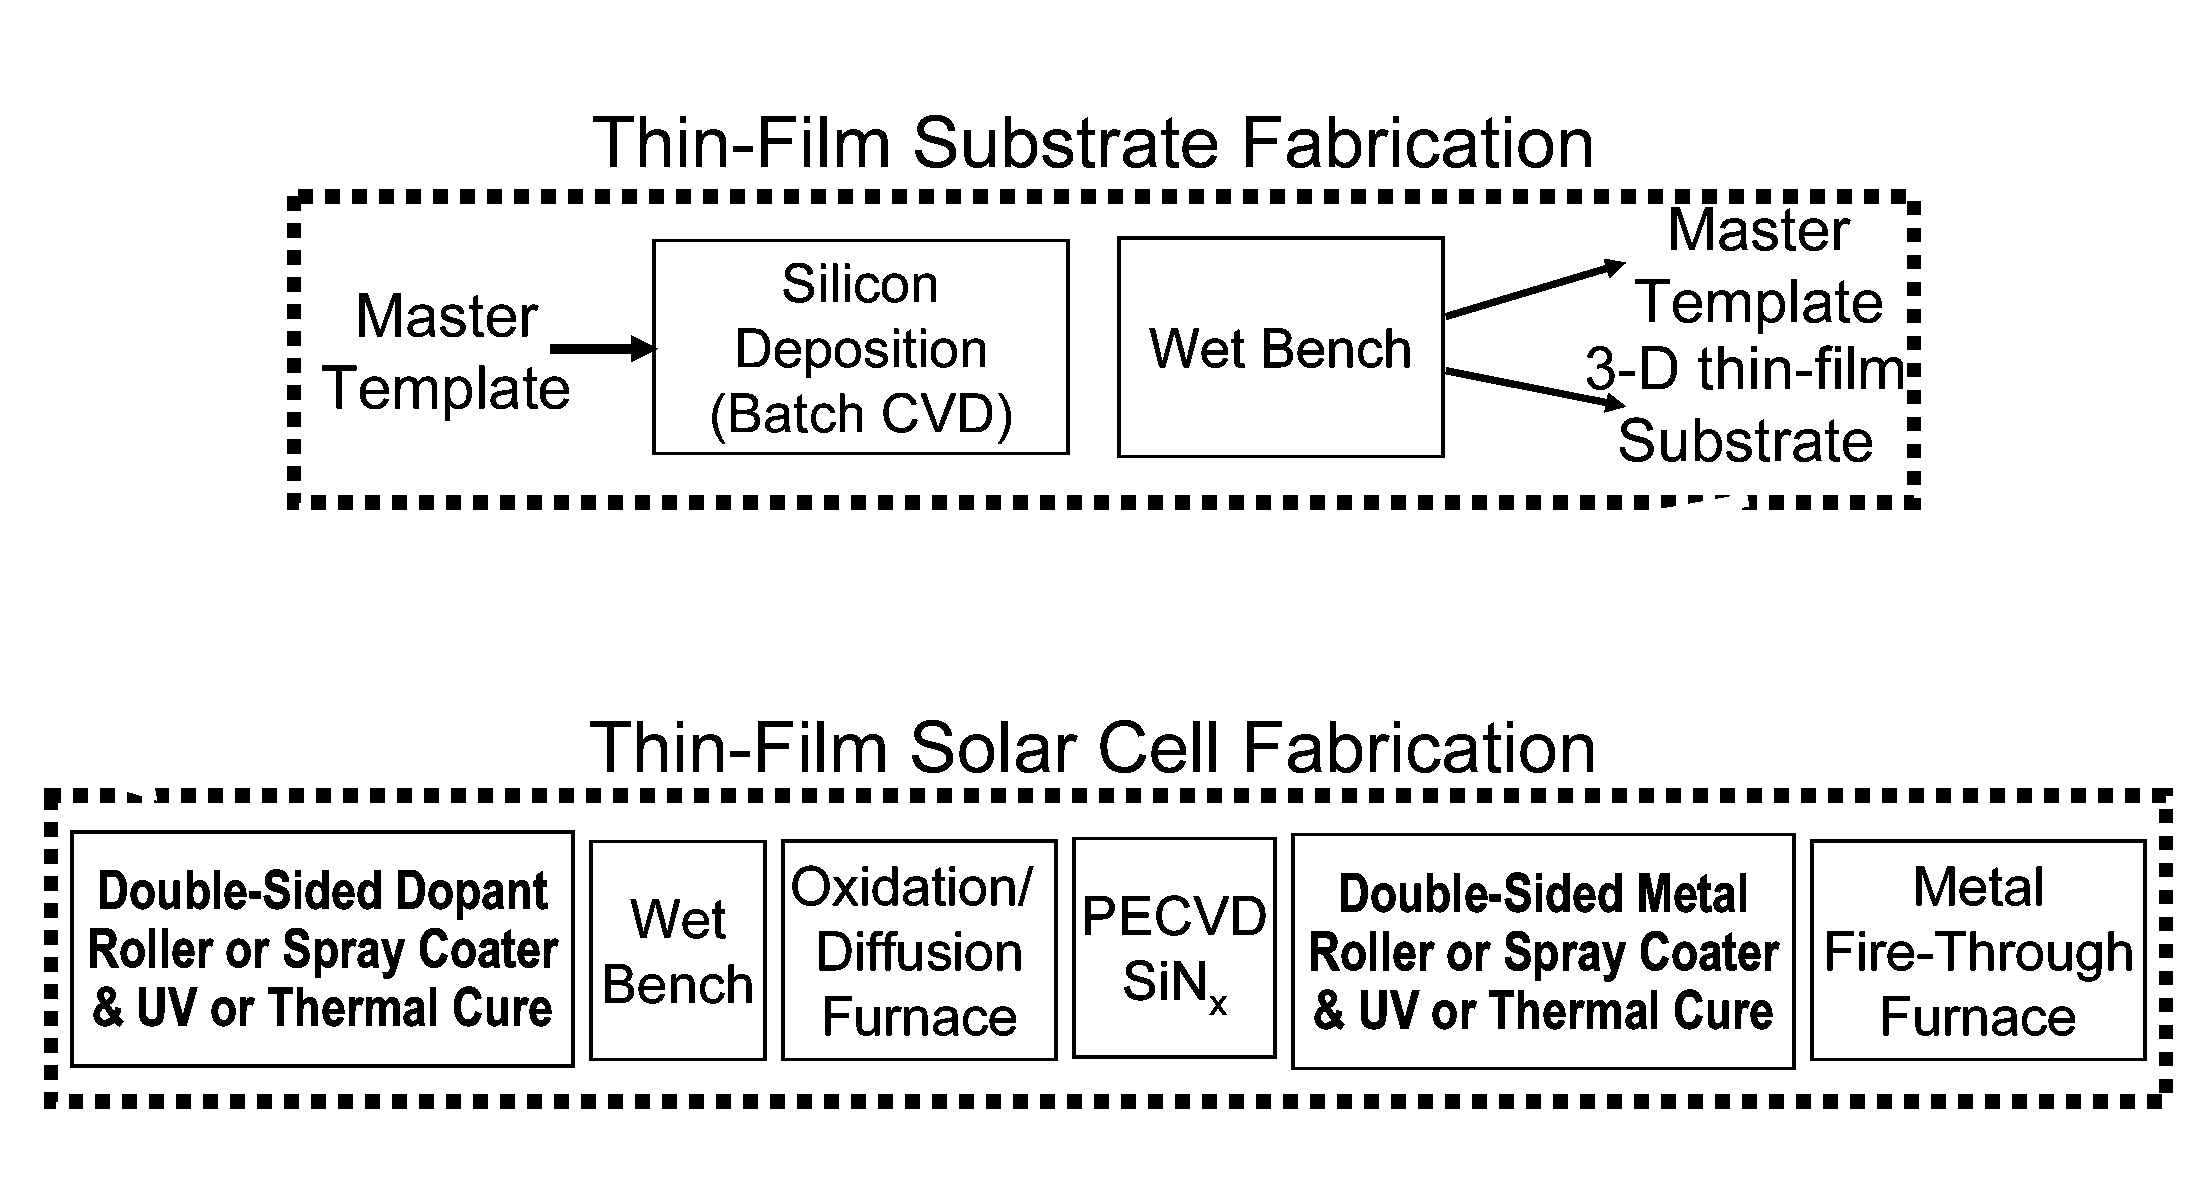 Methods for manufacturing three-dimensional thin-film solar cells